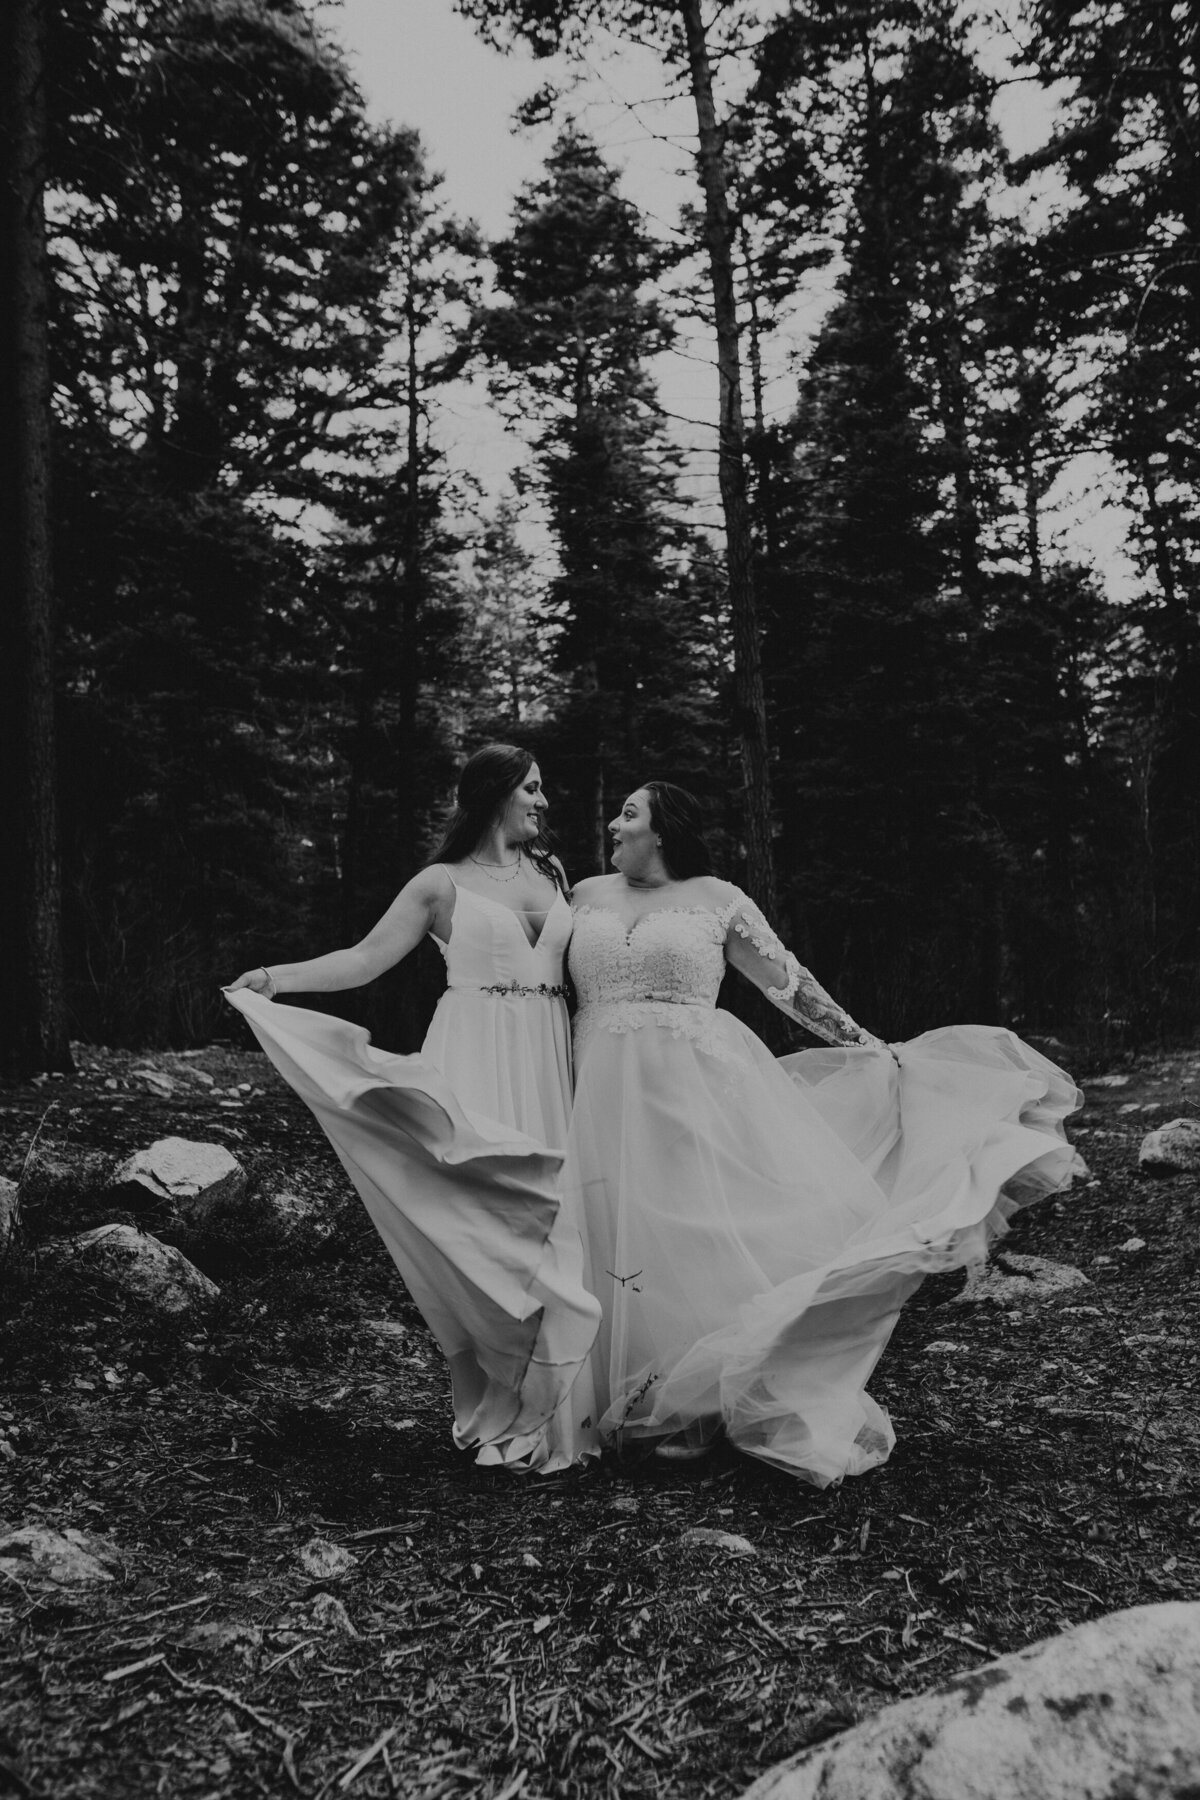 two brides spinning gowns together